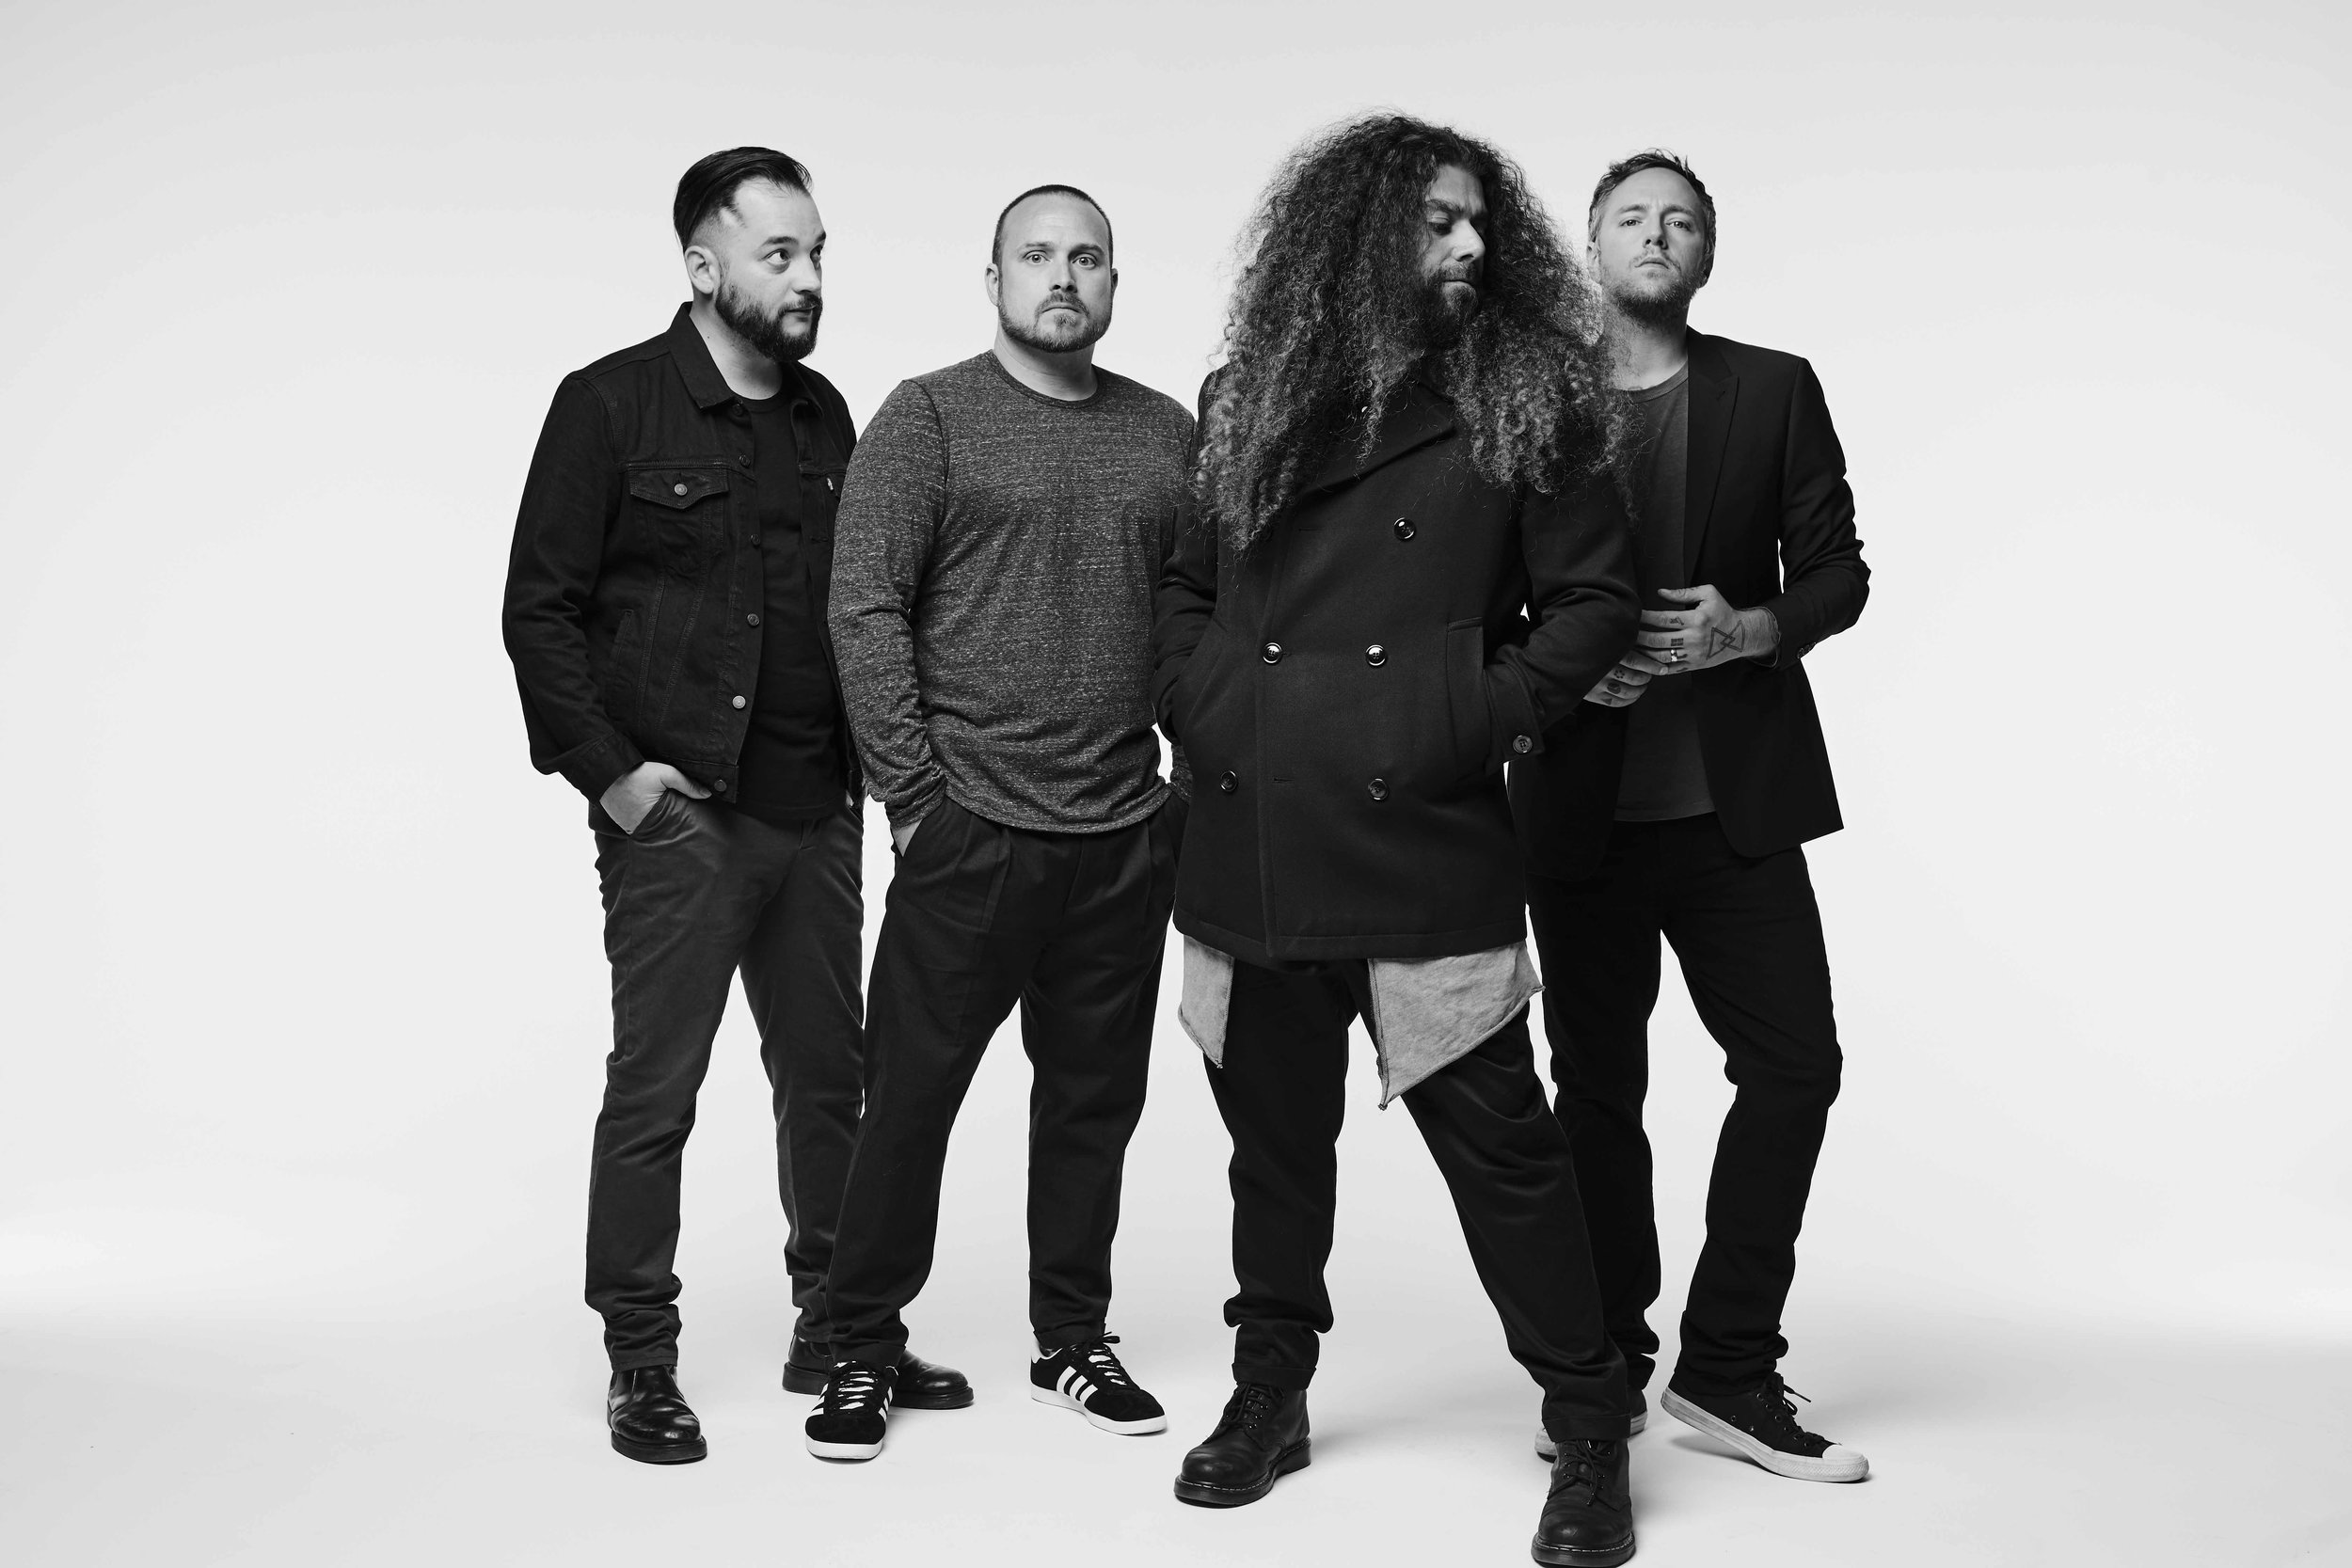 Coheed and Cambria - New Pub 2 2018 - Jimmy Fontaine - lo.jpg